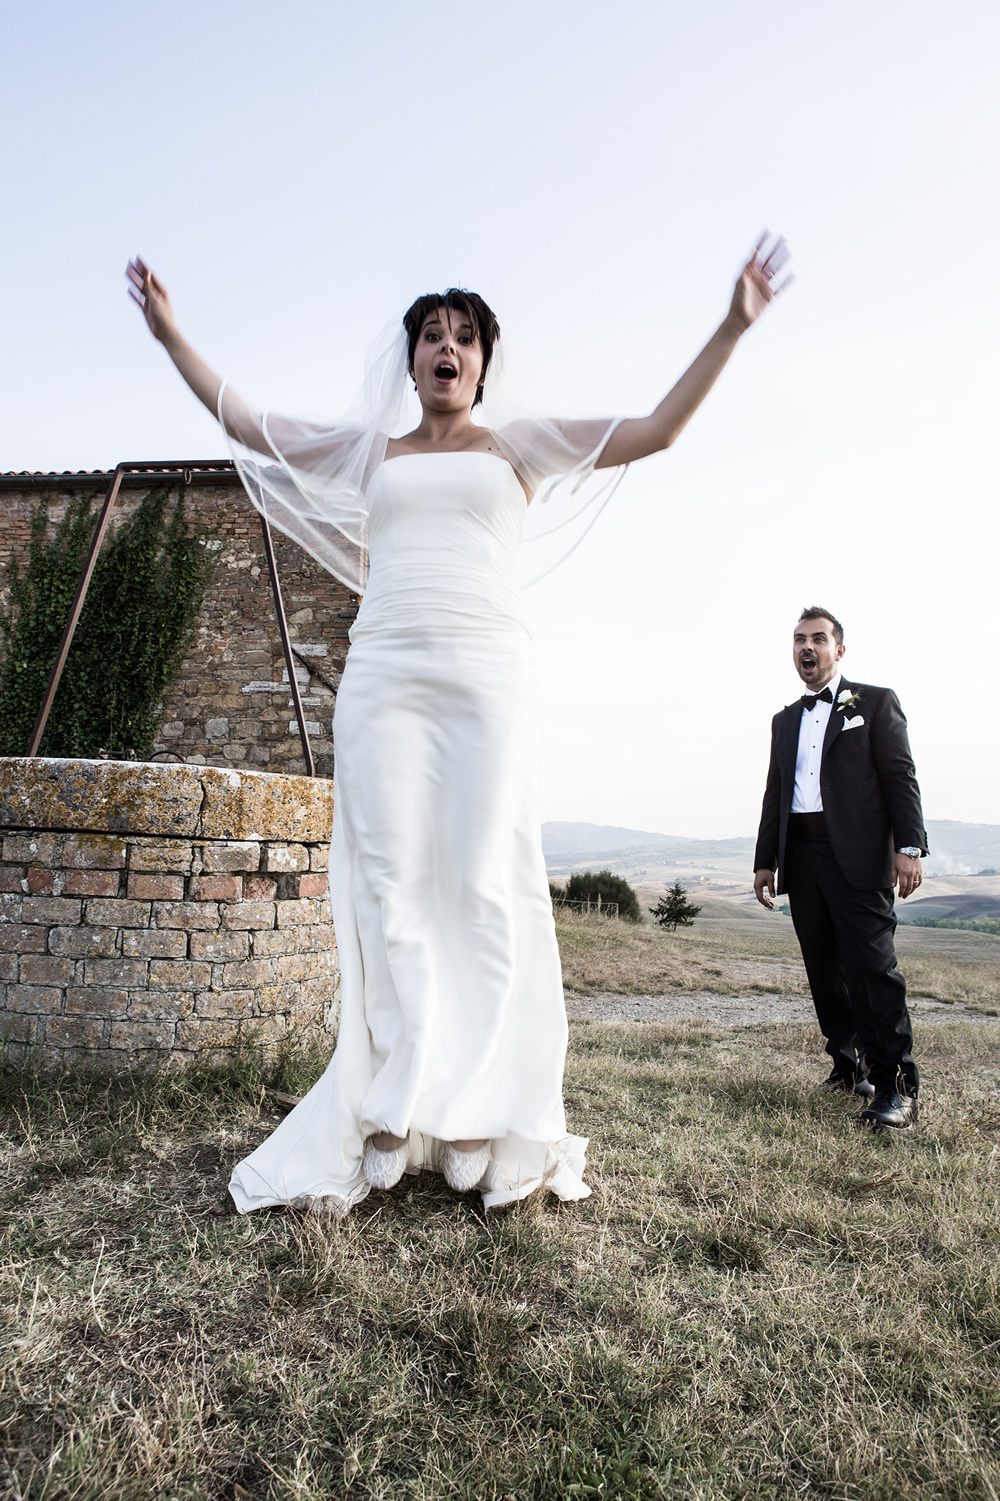 Le tue wedding planner in Toscana